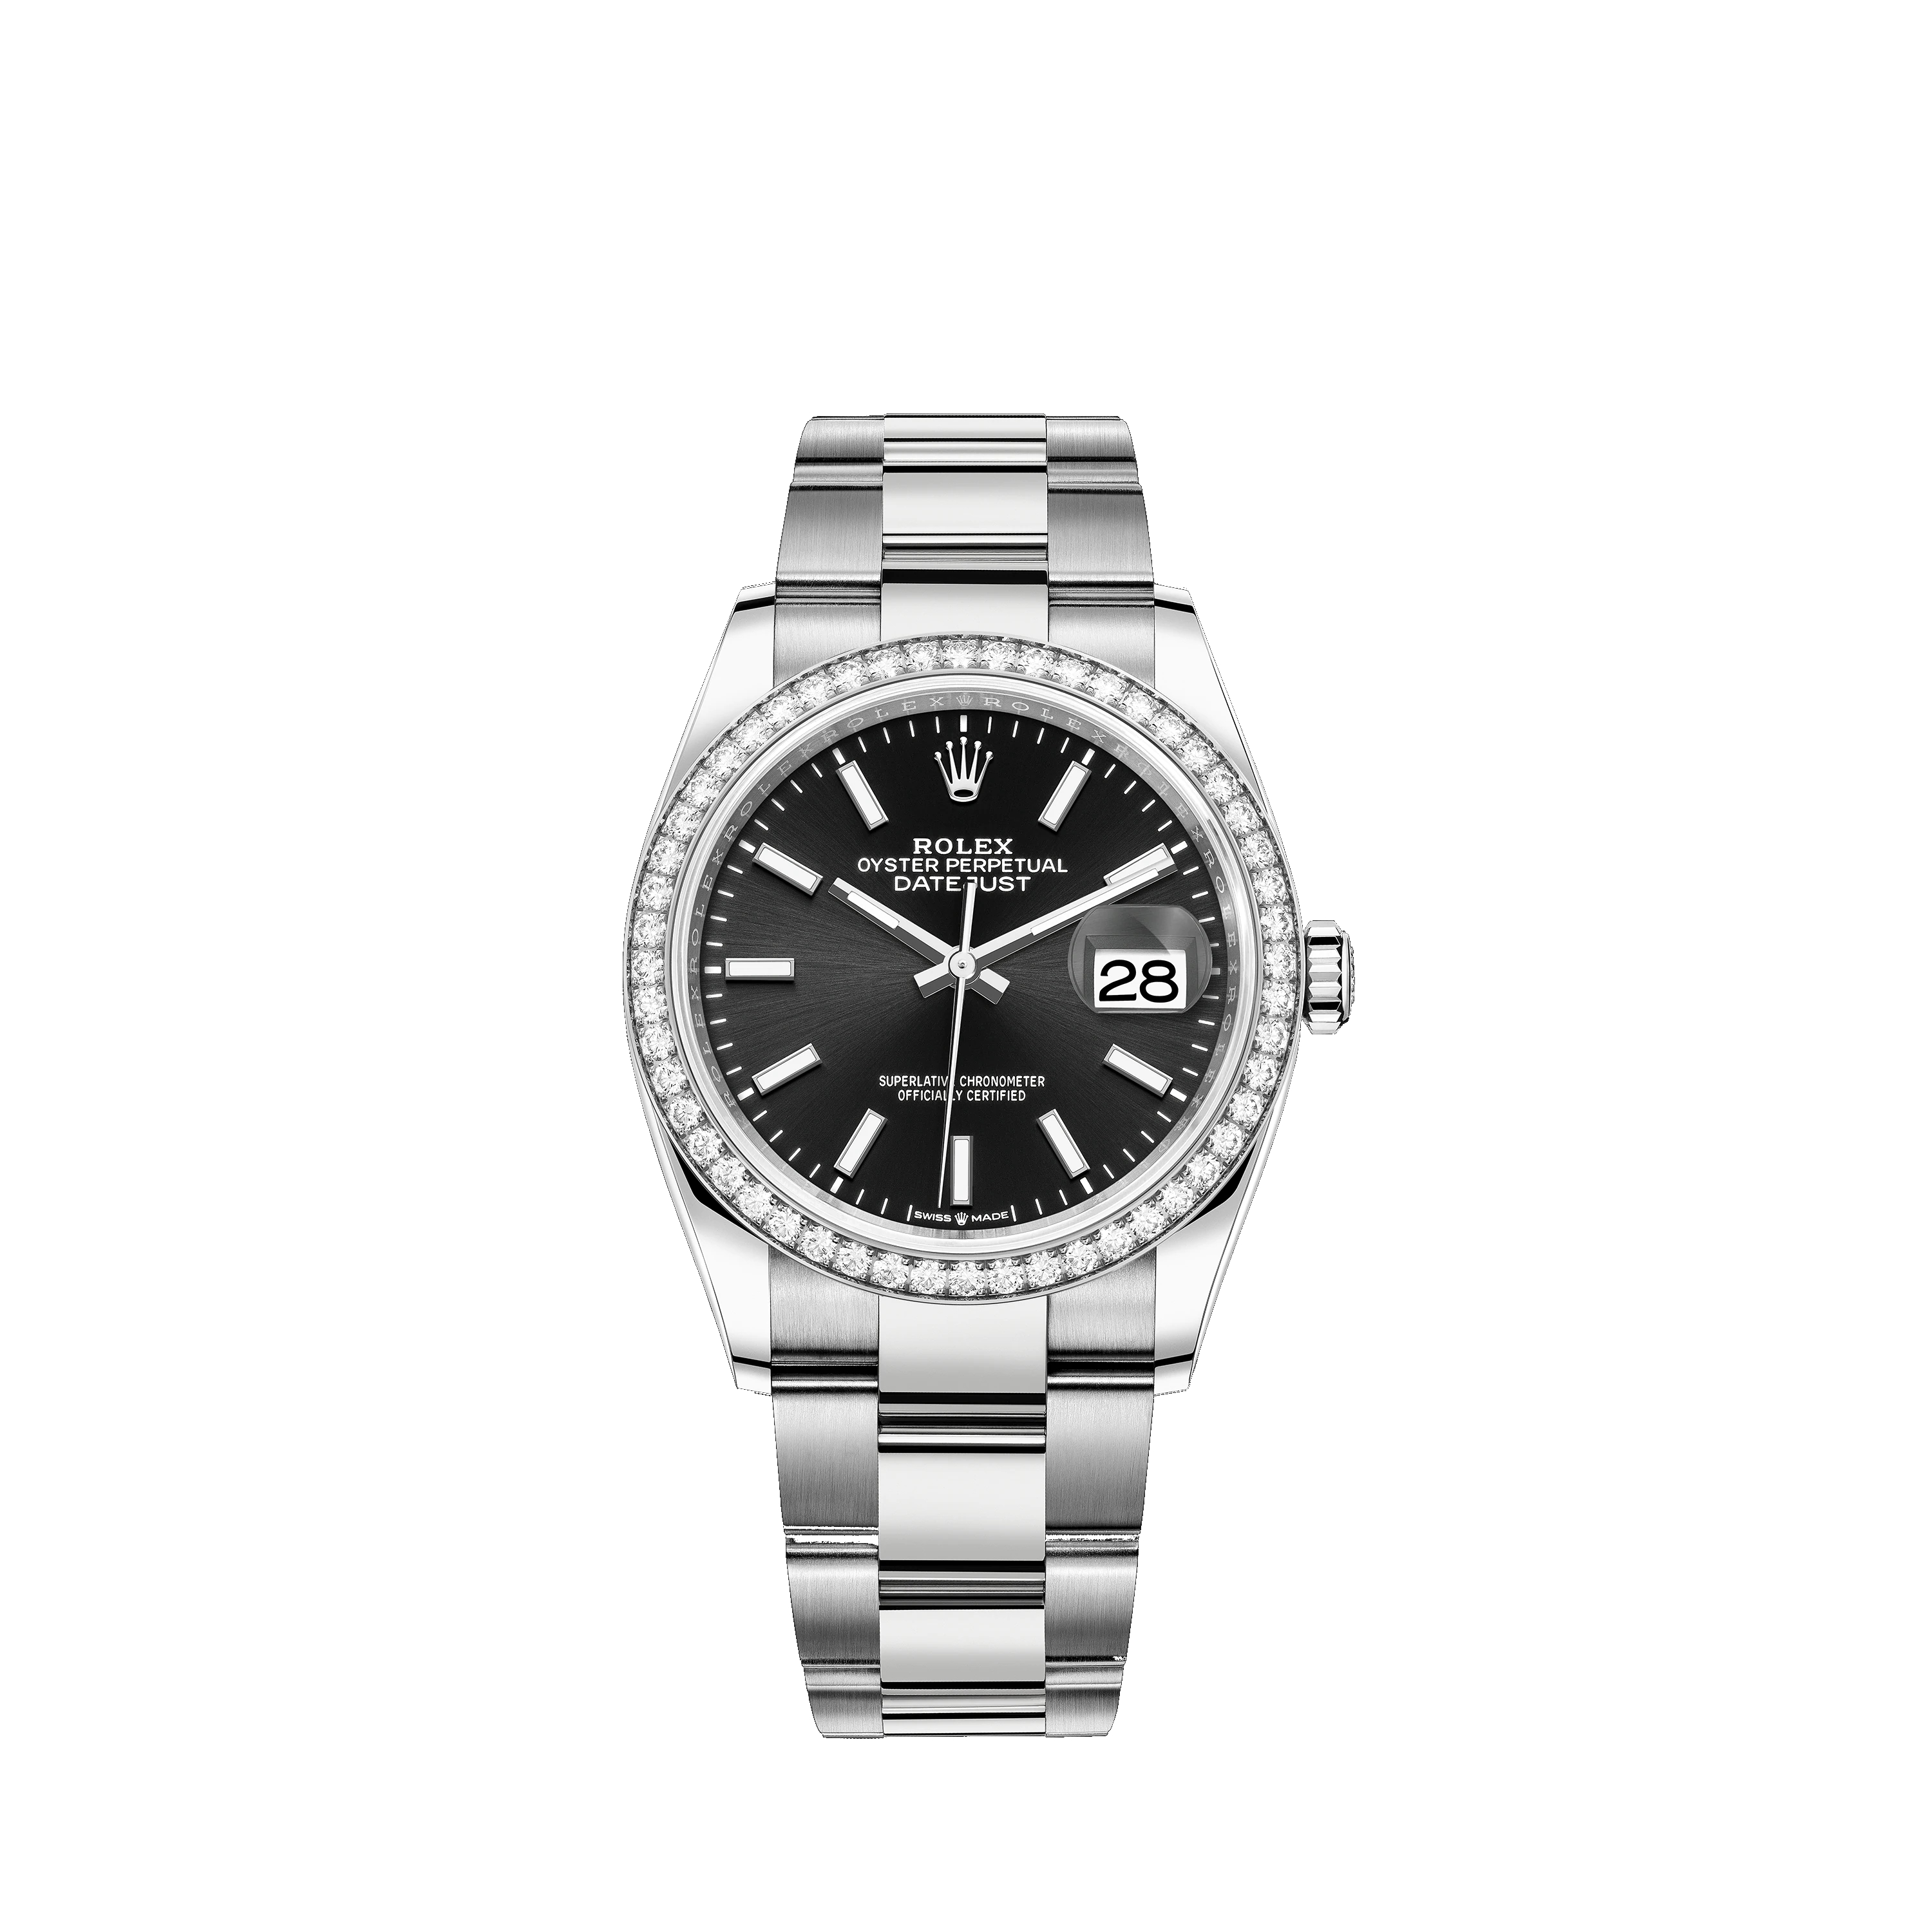 Datejust 36 126284RBR White Gold, Stainless Steel & Diamonds Watch (Black)